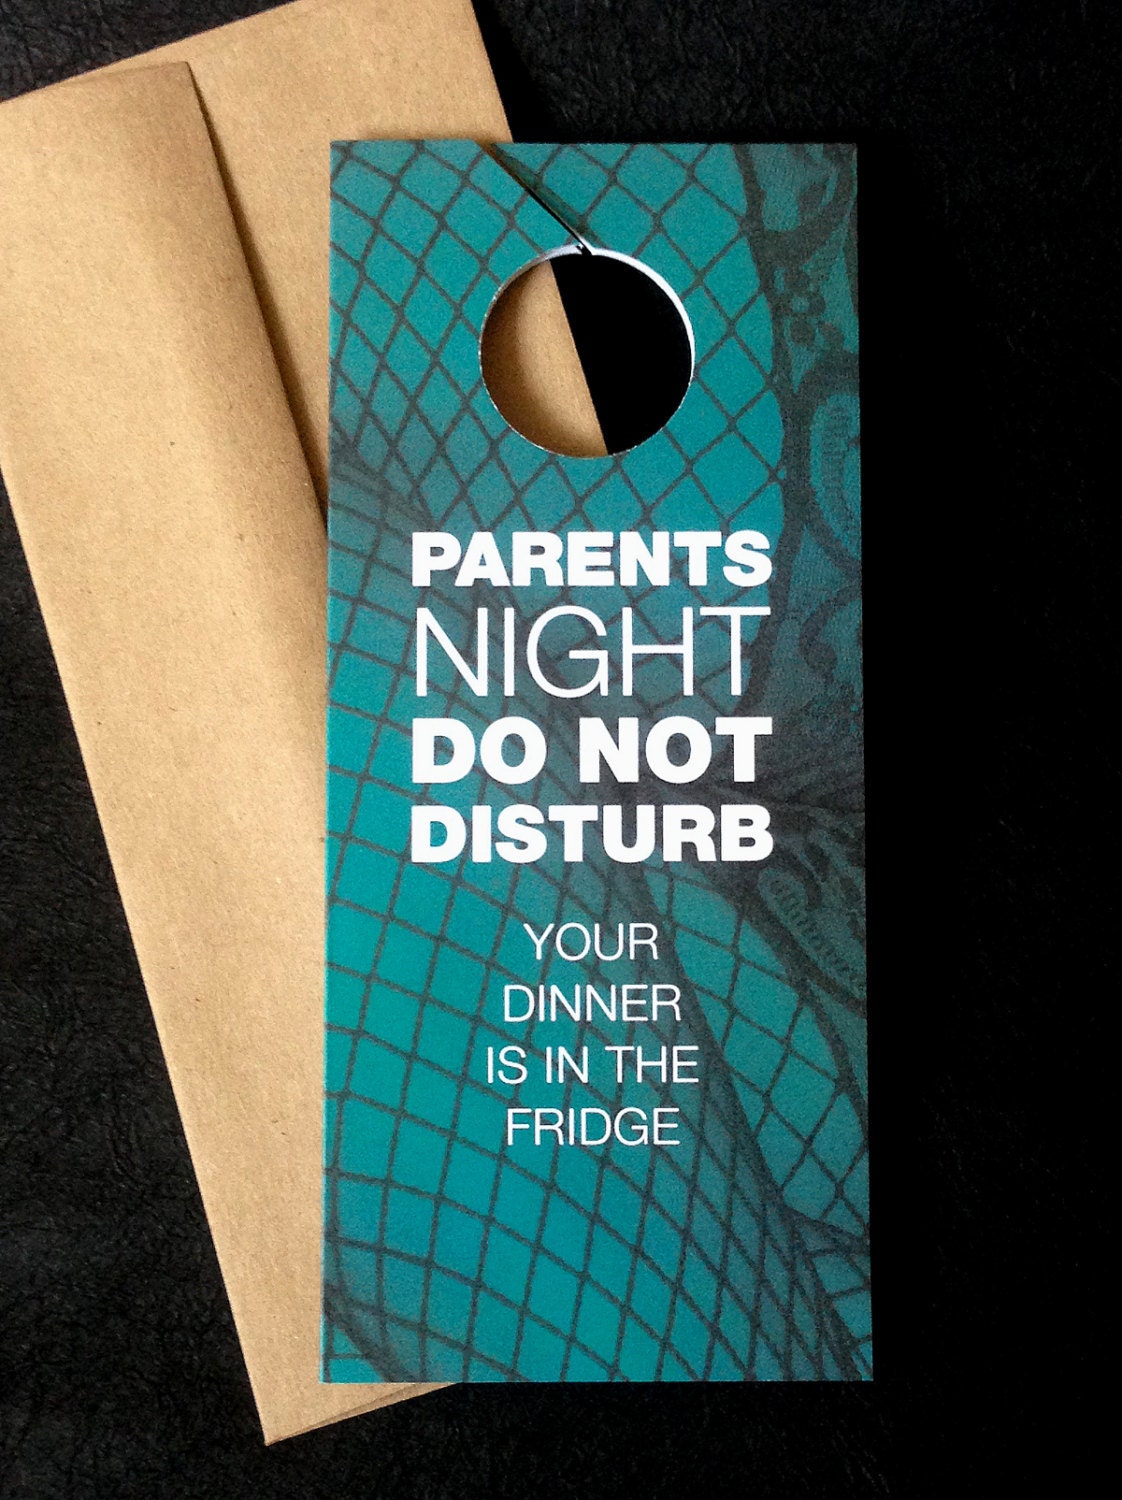 167 Sexy Date Card For Spouse Doubles As Do Not Disturb Sign